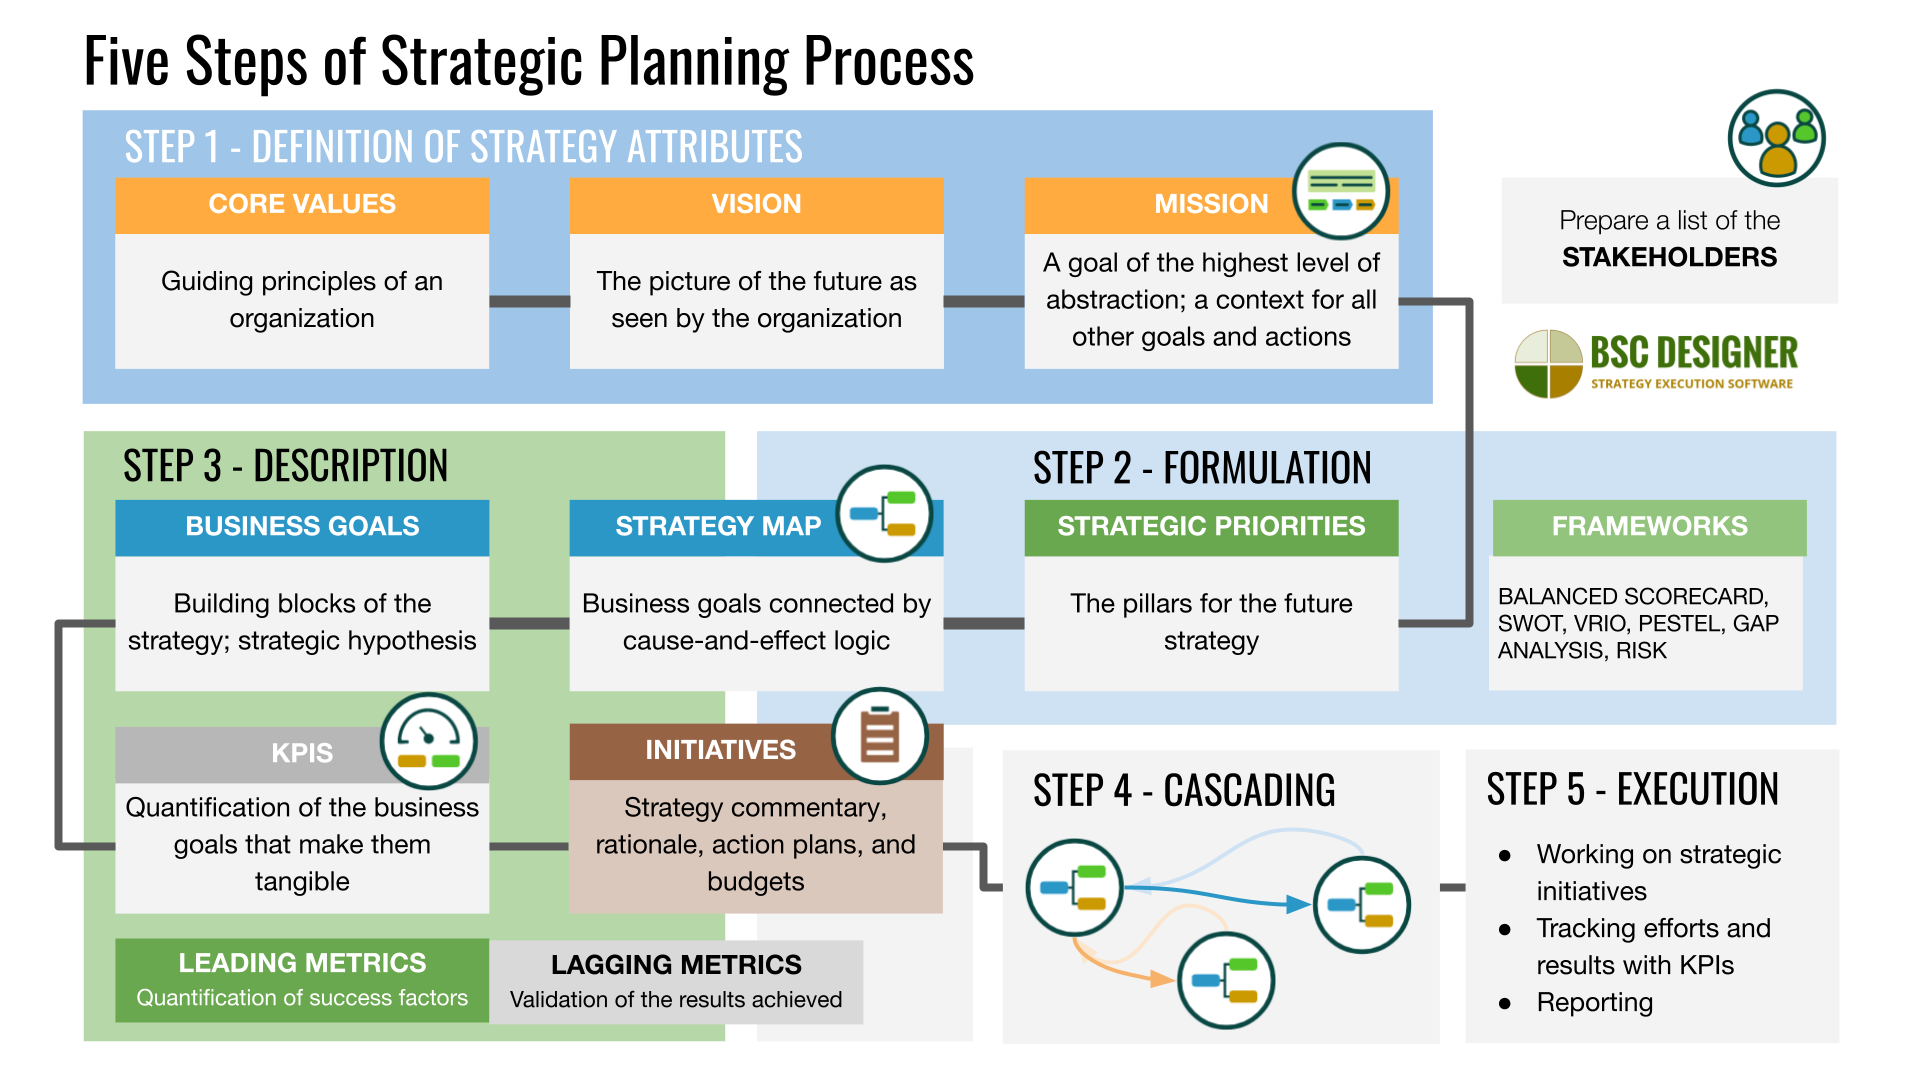 5 steps of strategic planning process from defining values, vision, and mission to describing strategy on strategy maps with business goals, KPIs, and initiatives. 